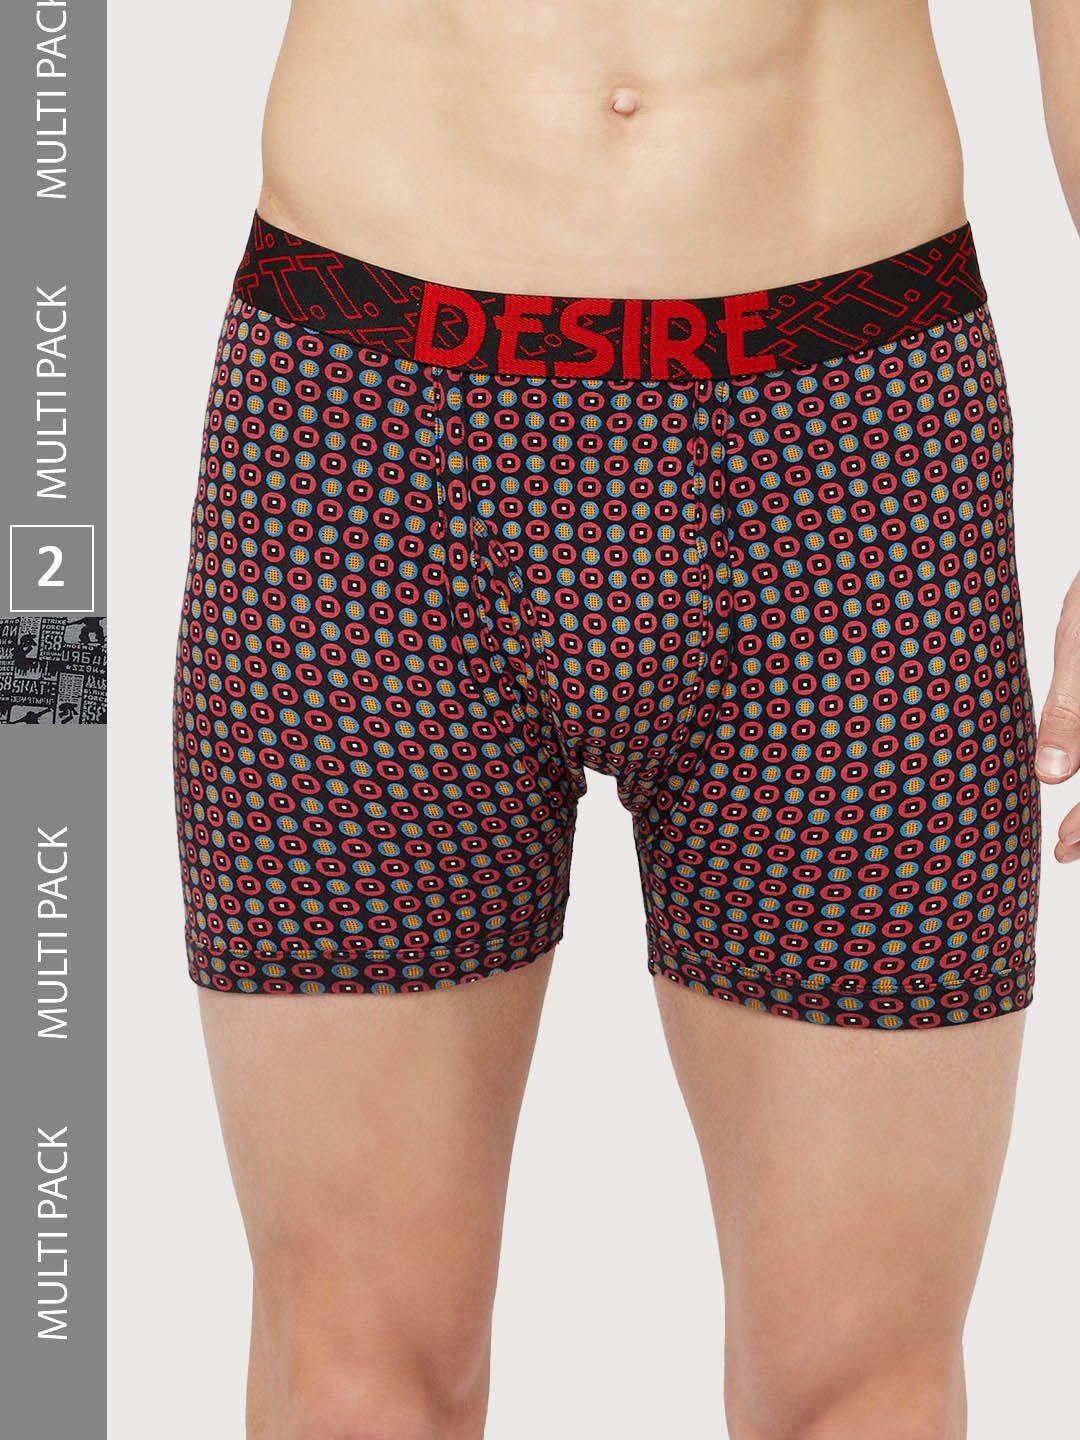 t.t. pack of 2 printed cotton trunks